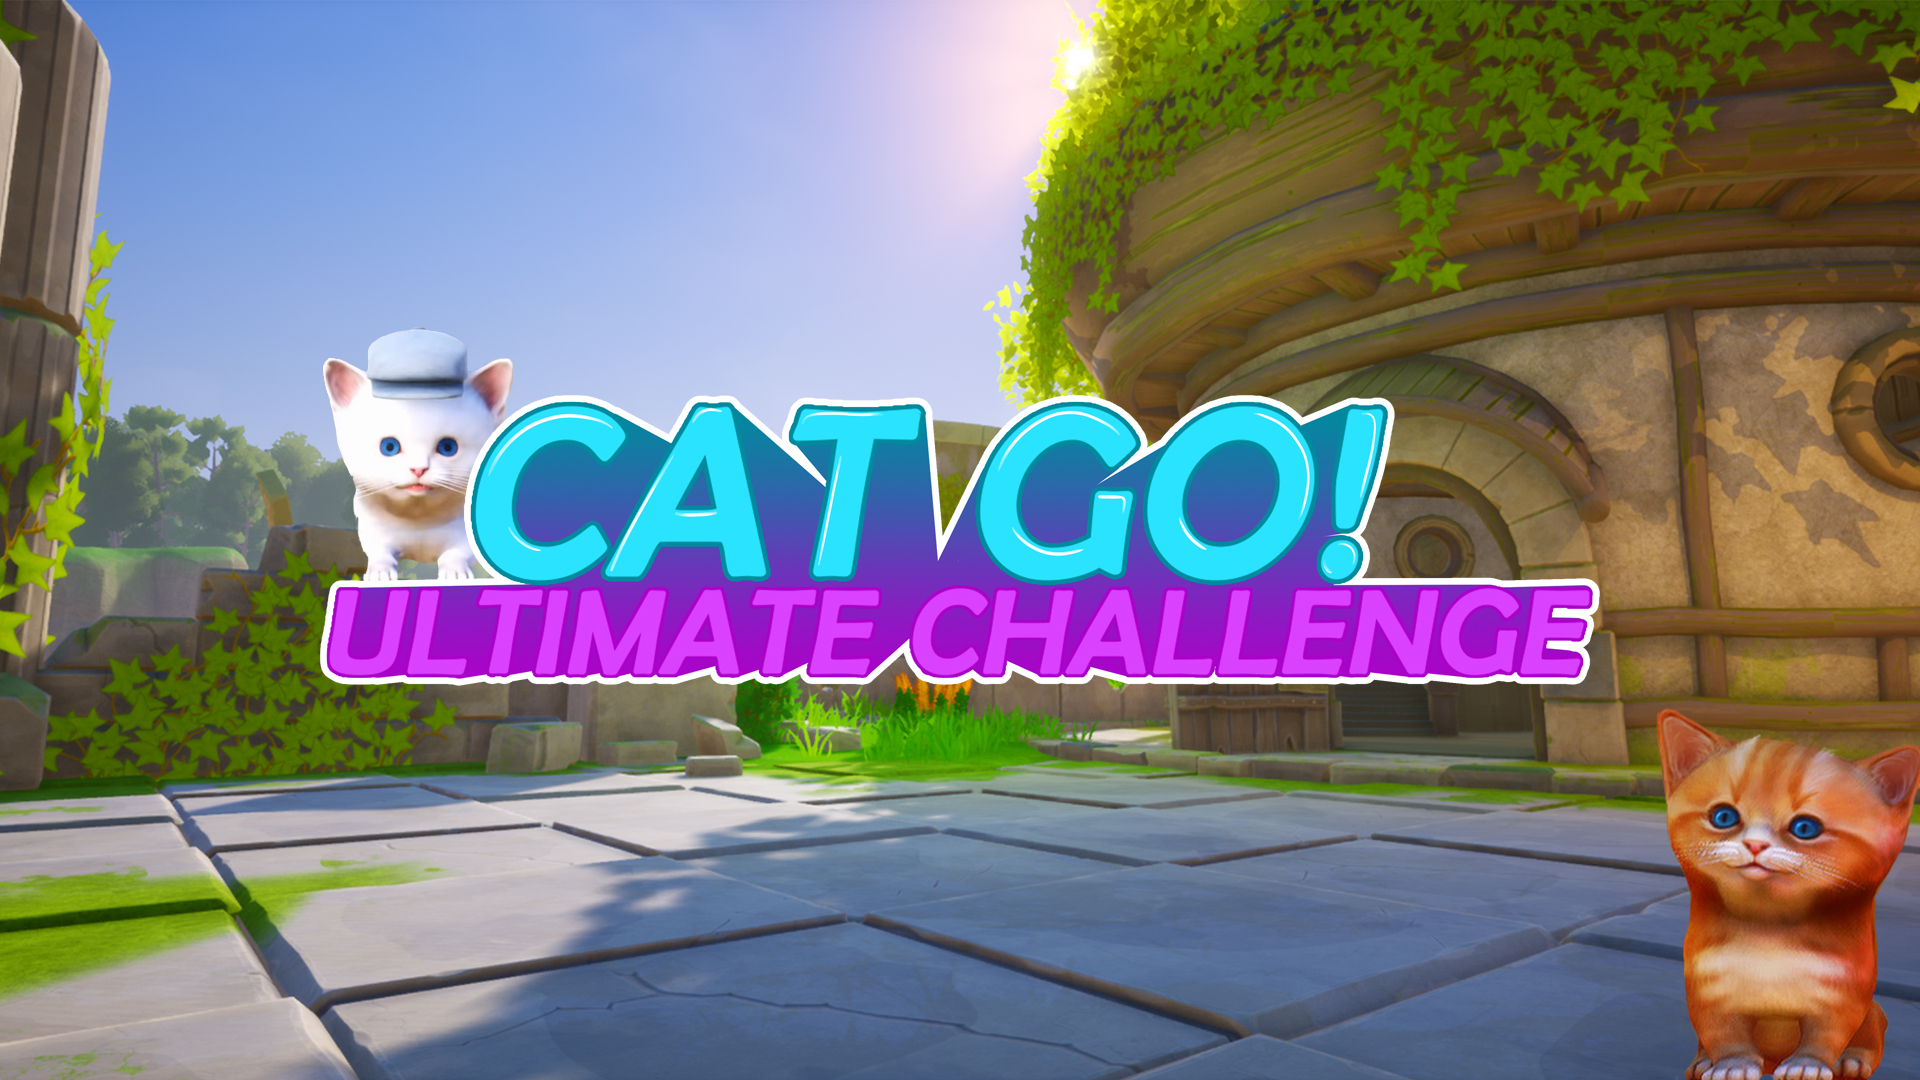 Cat Go! Ultimate Challenge - Nintendo Switch Game | PlayLikeScrooge tracks over 6000 nintendo switch games